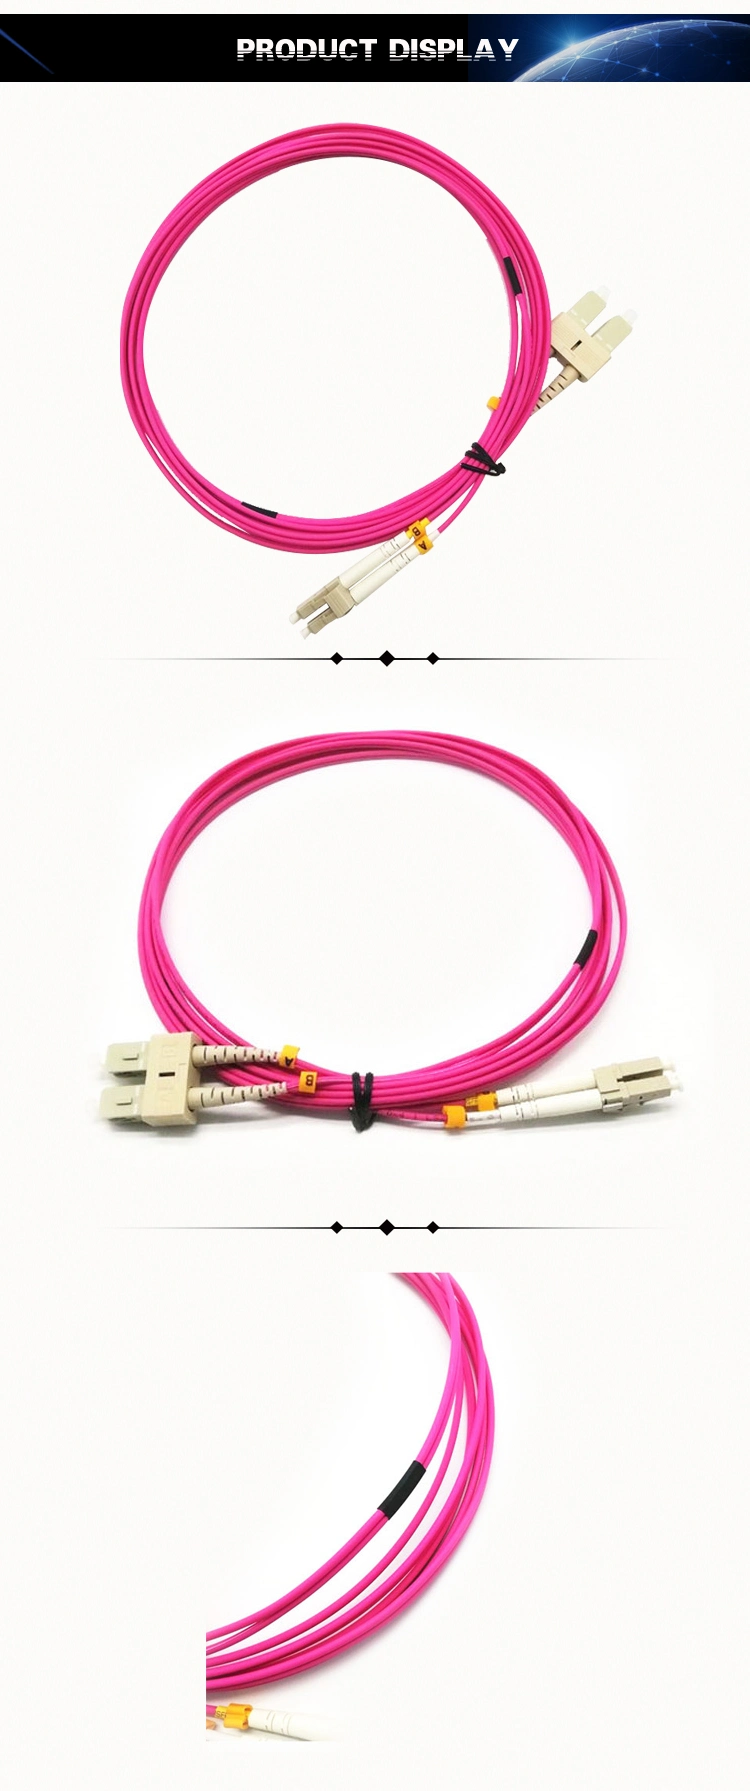 LC Sc Upc Factory Direct Supply OEM MTP MPO Om4 Fiber Optic Patch Cord